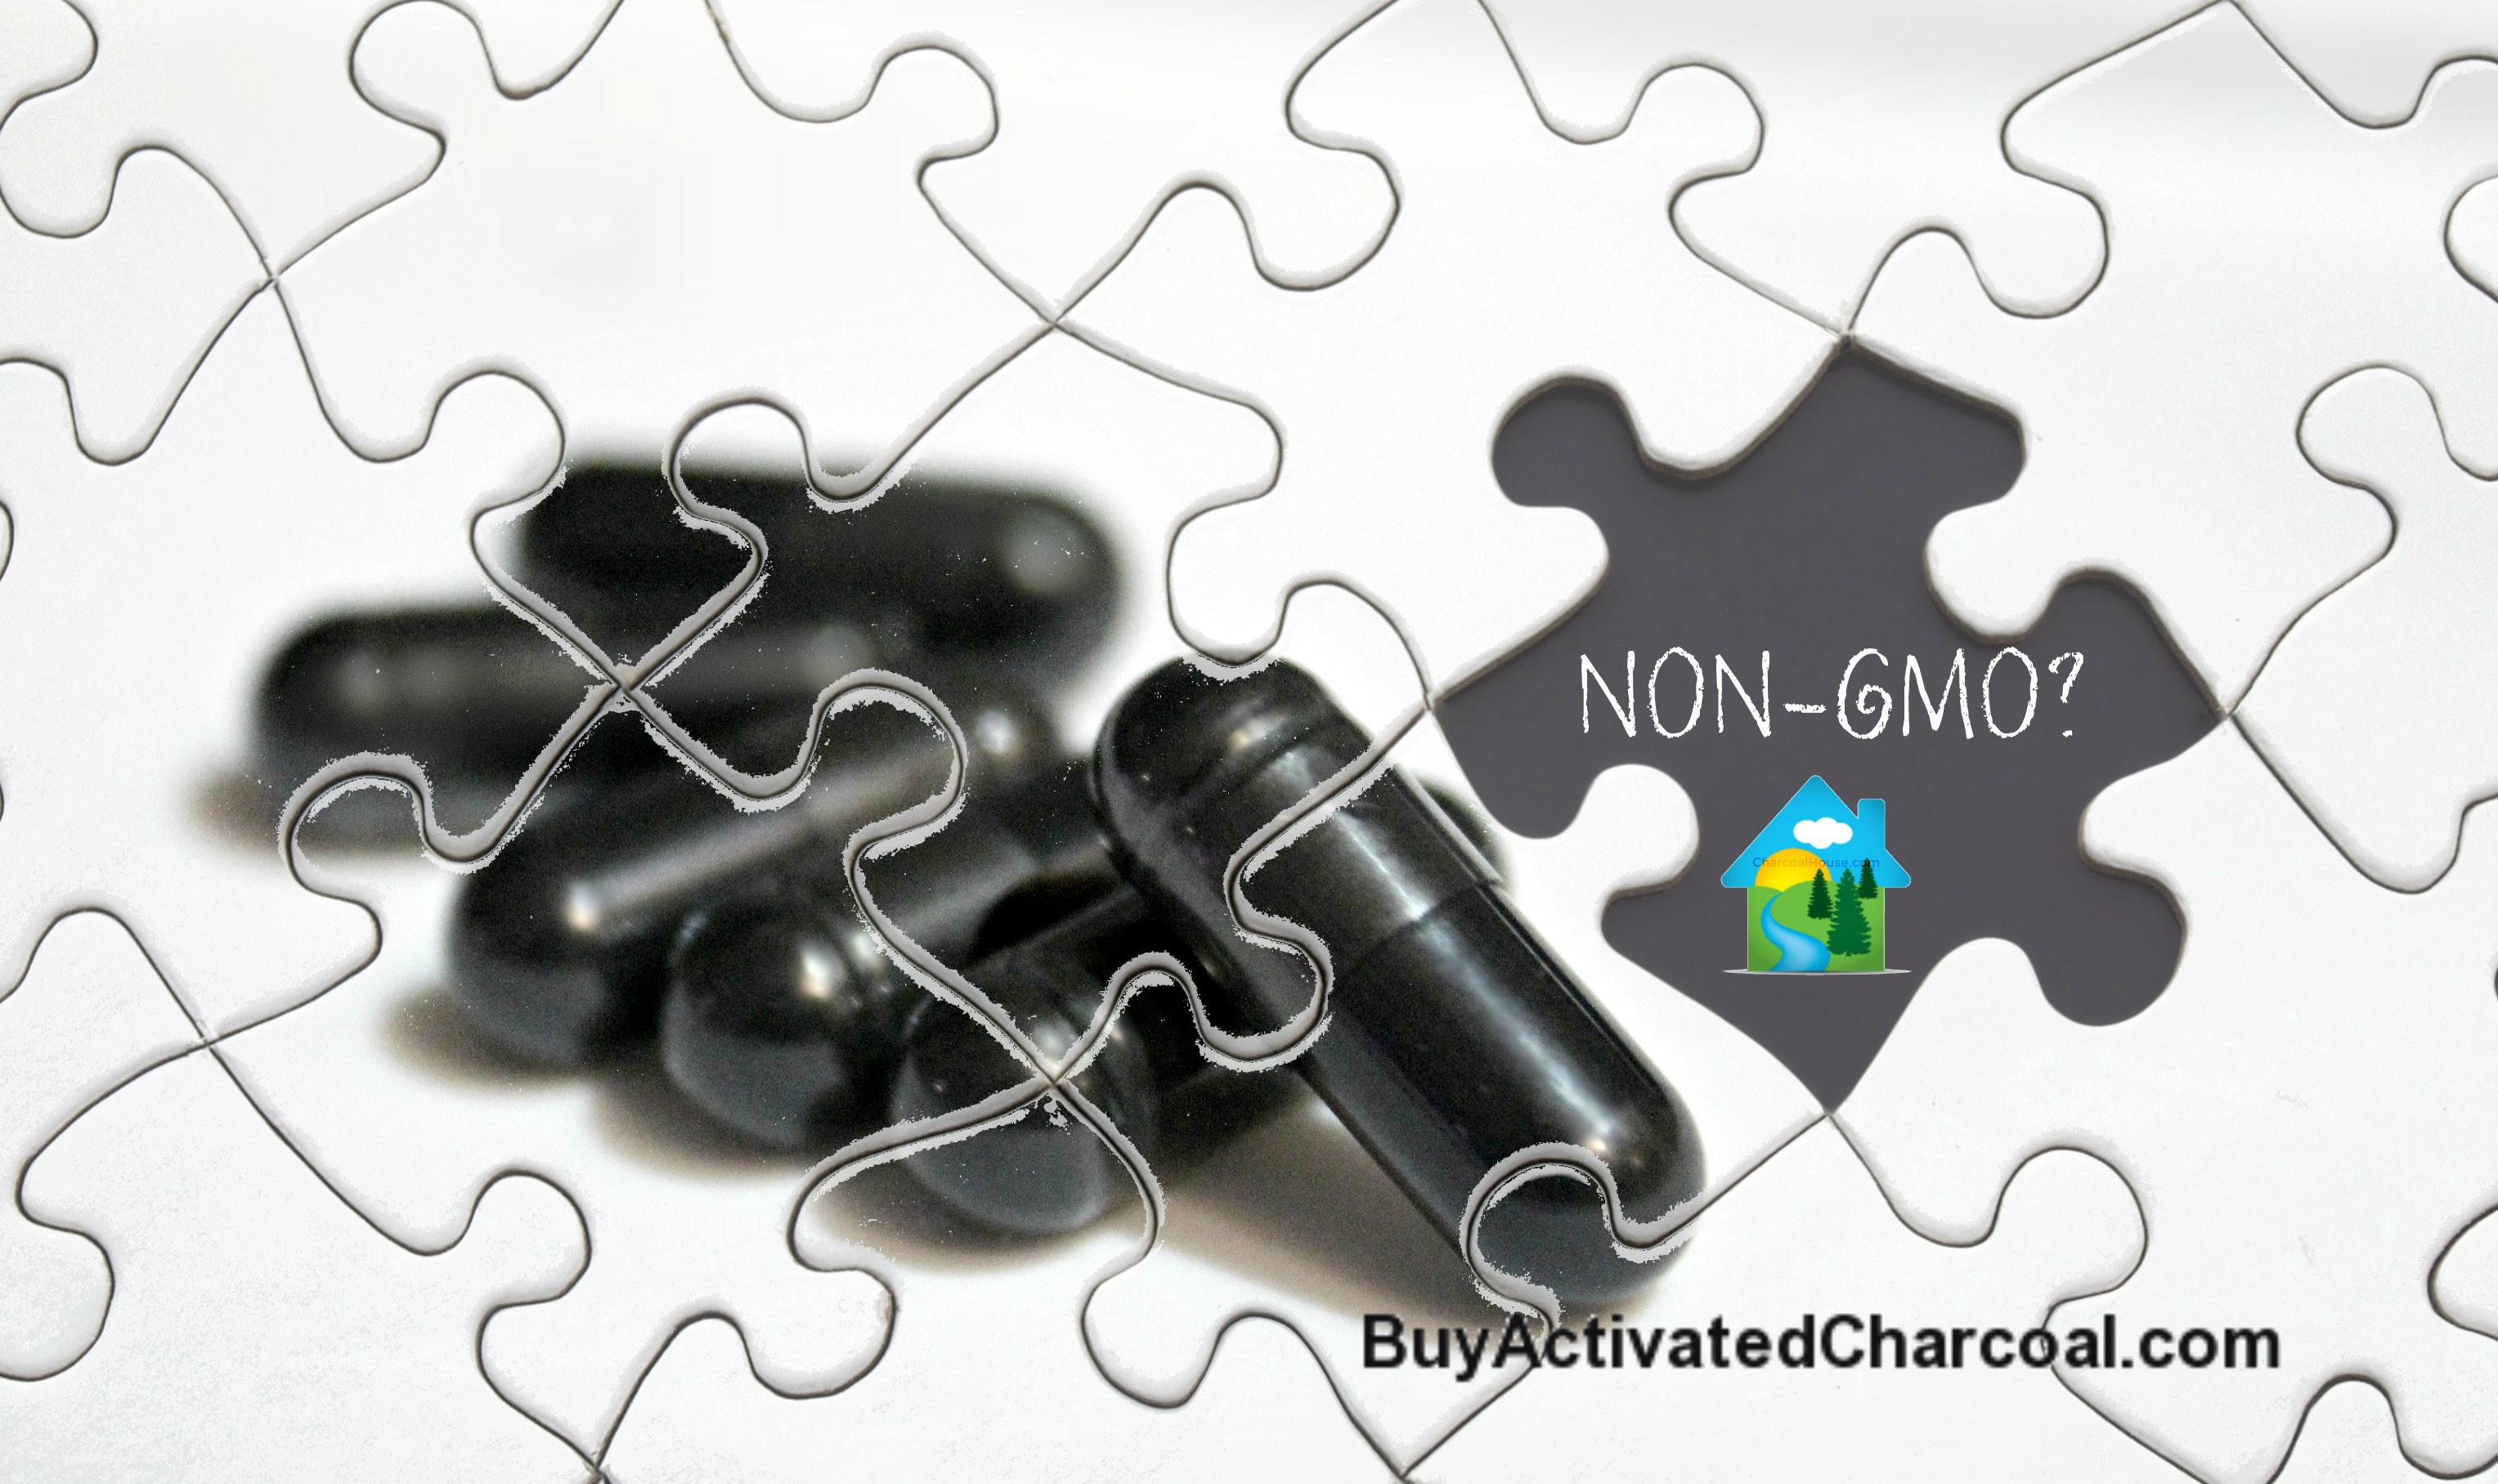 Are your charcoal capsules NON GMO - Are your charcoal capsules NON-GMO?